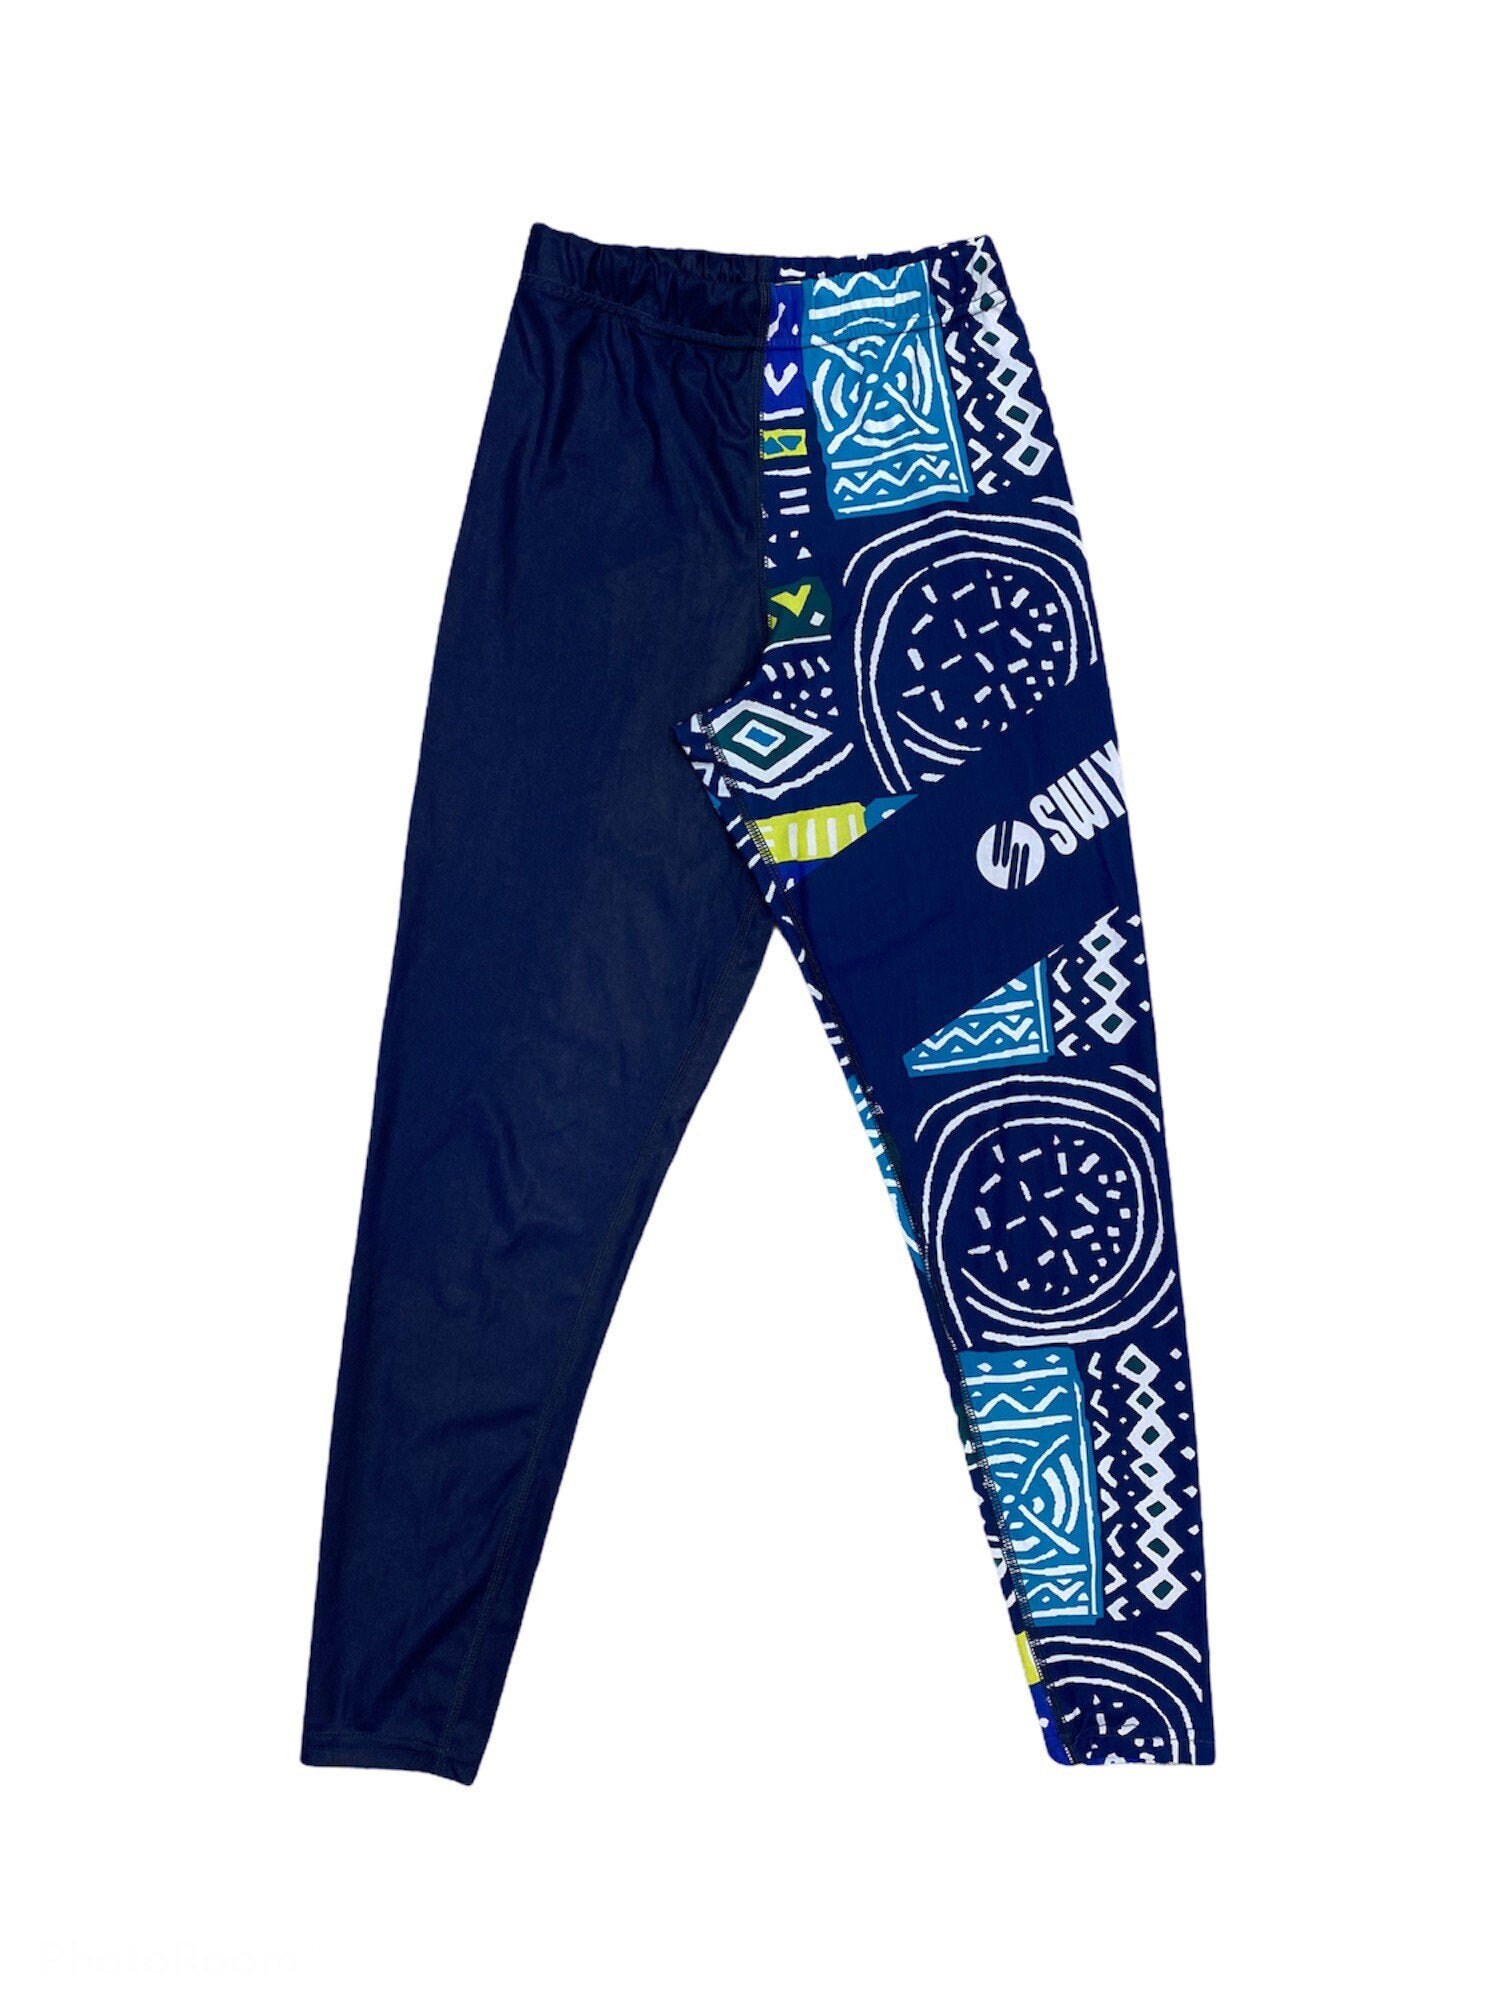 Womens vintage leggings with Aztec-inspired design and drawstring